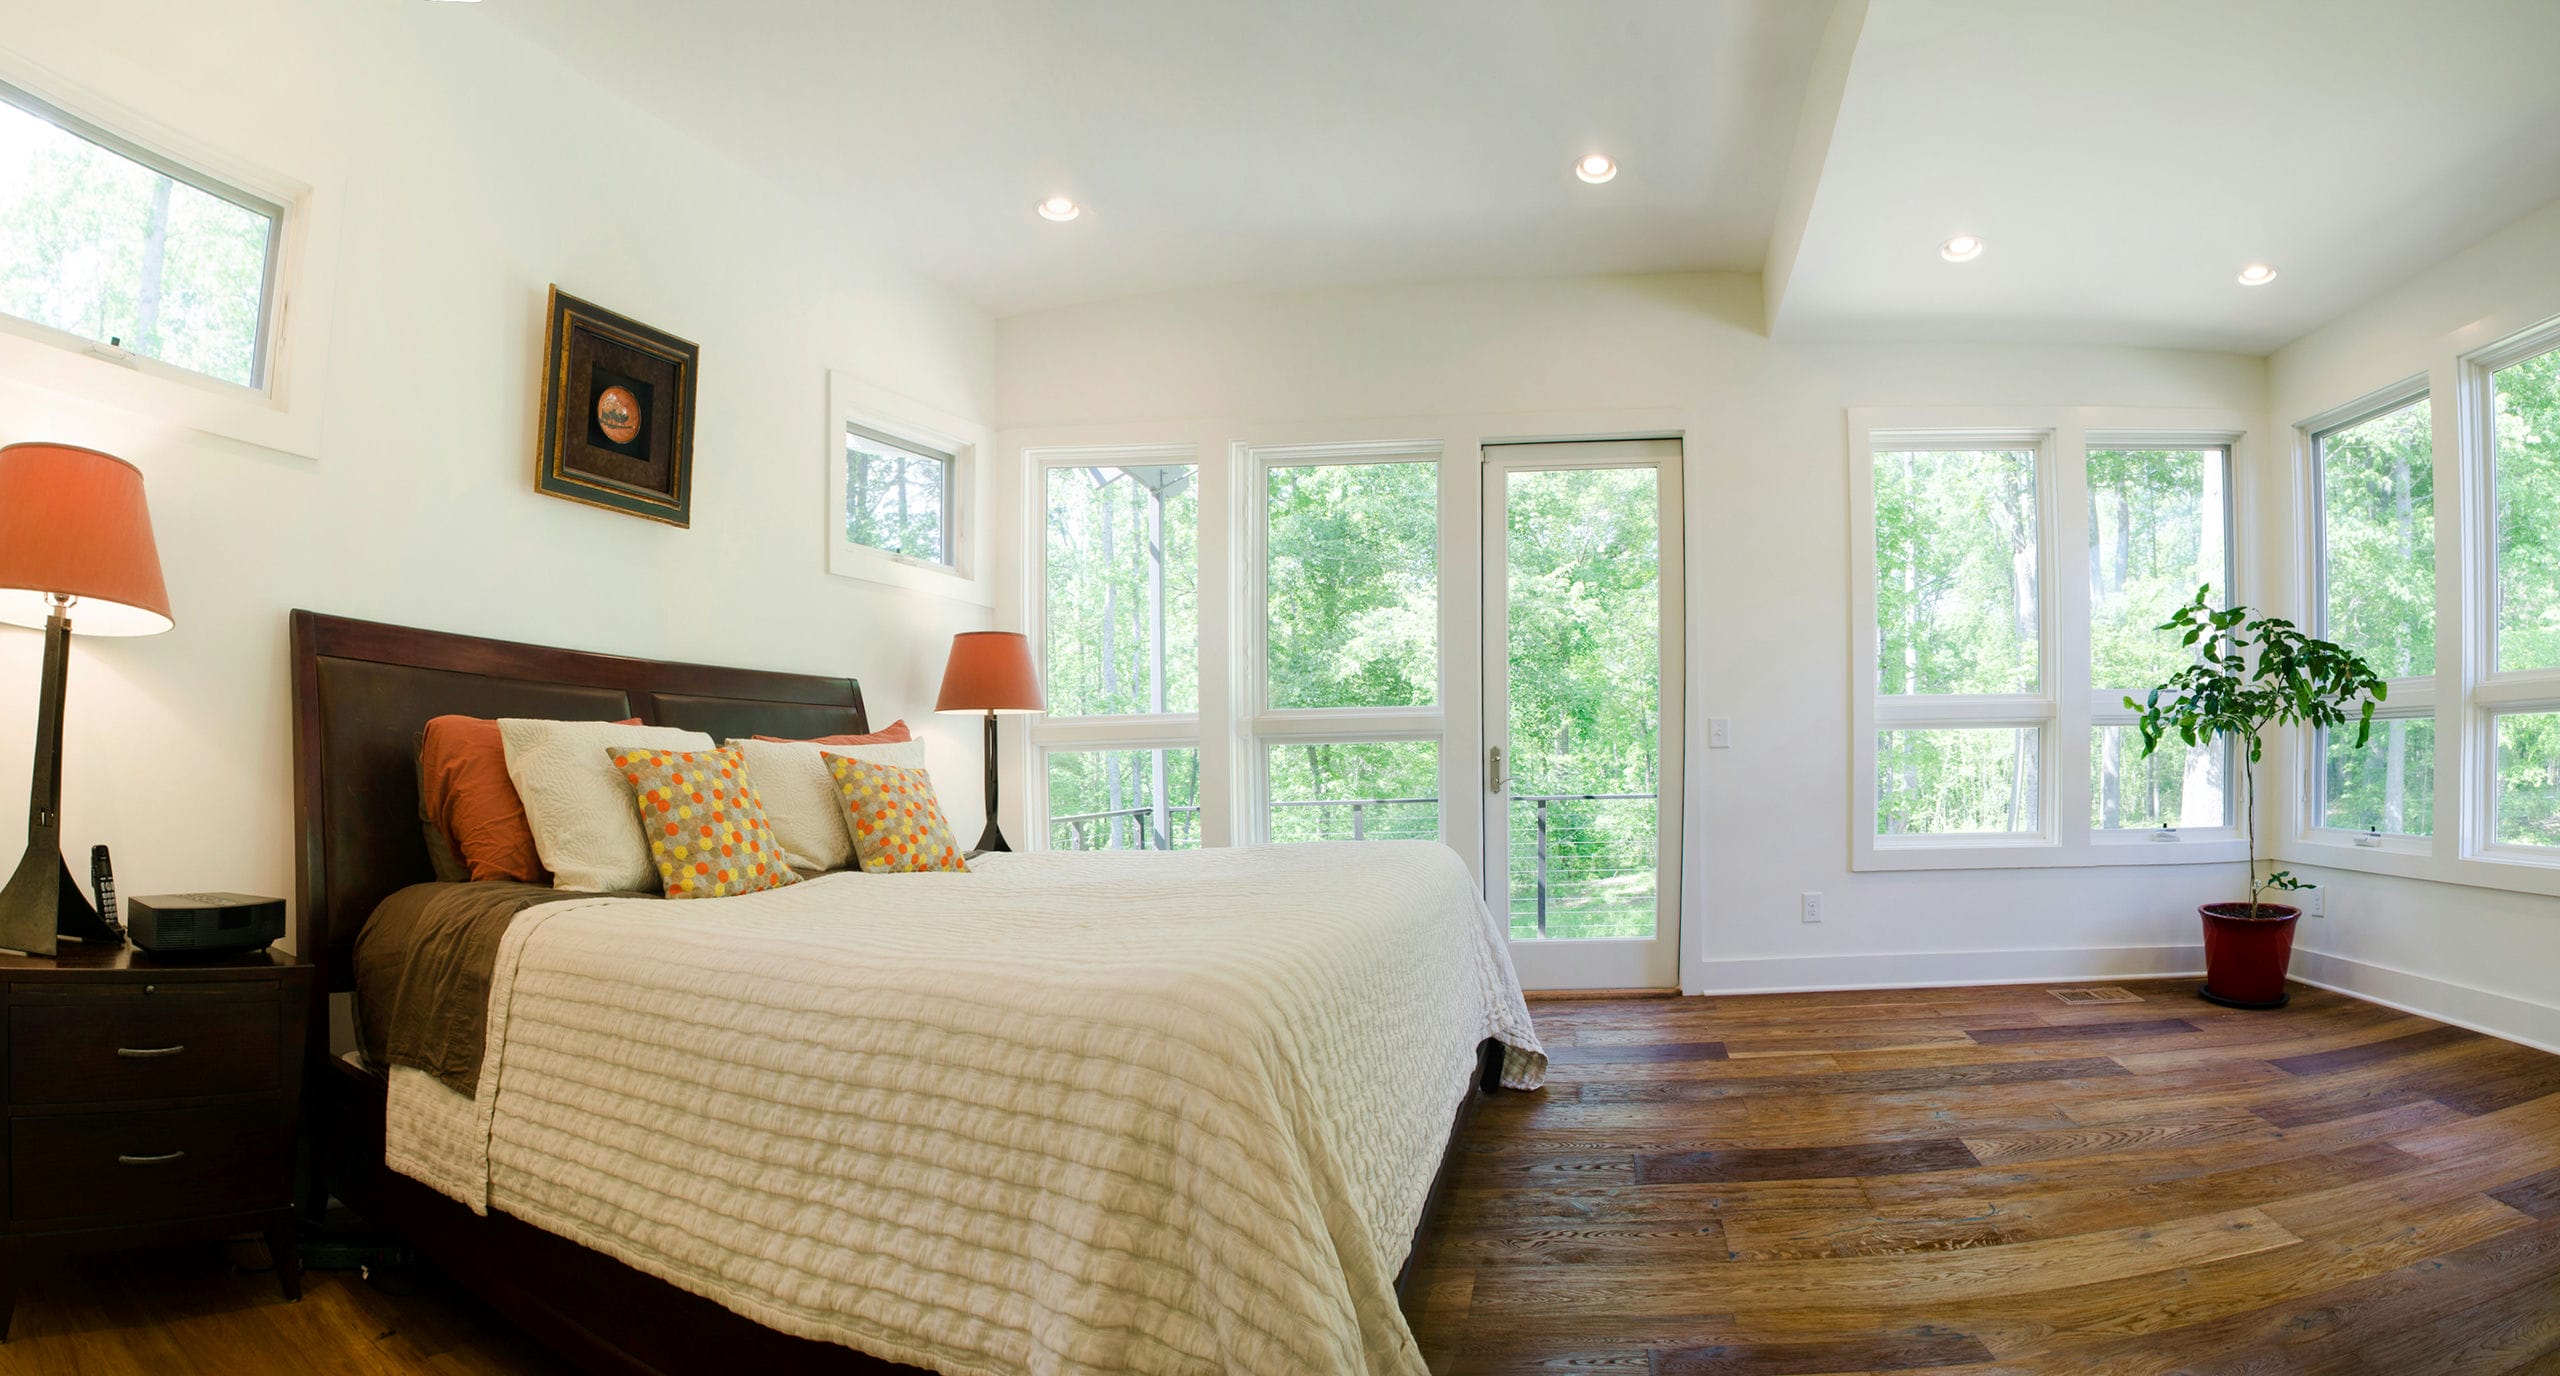 Bright and airy primary bedroom with rustic wood floors and and corner windows and balcony